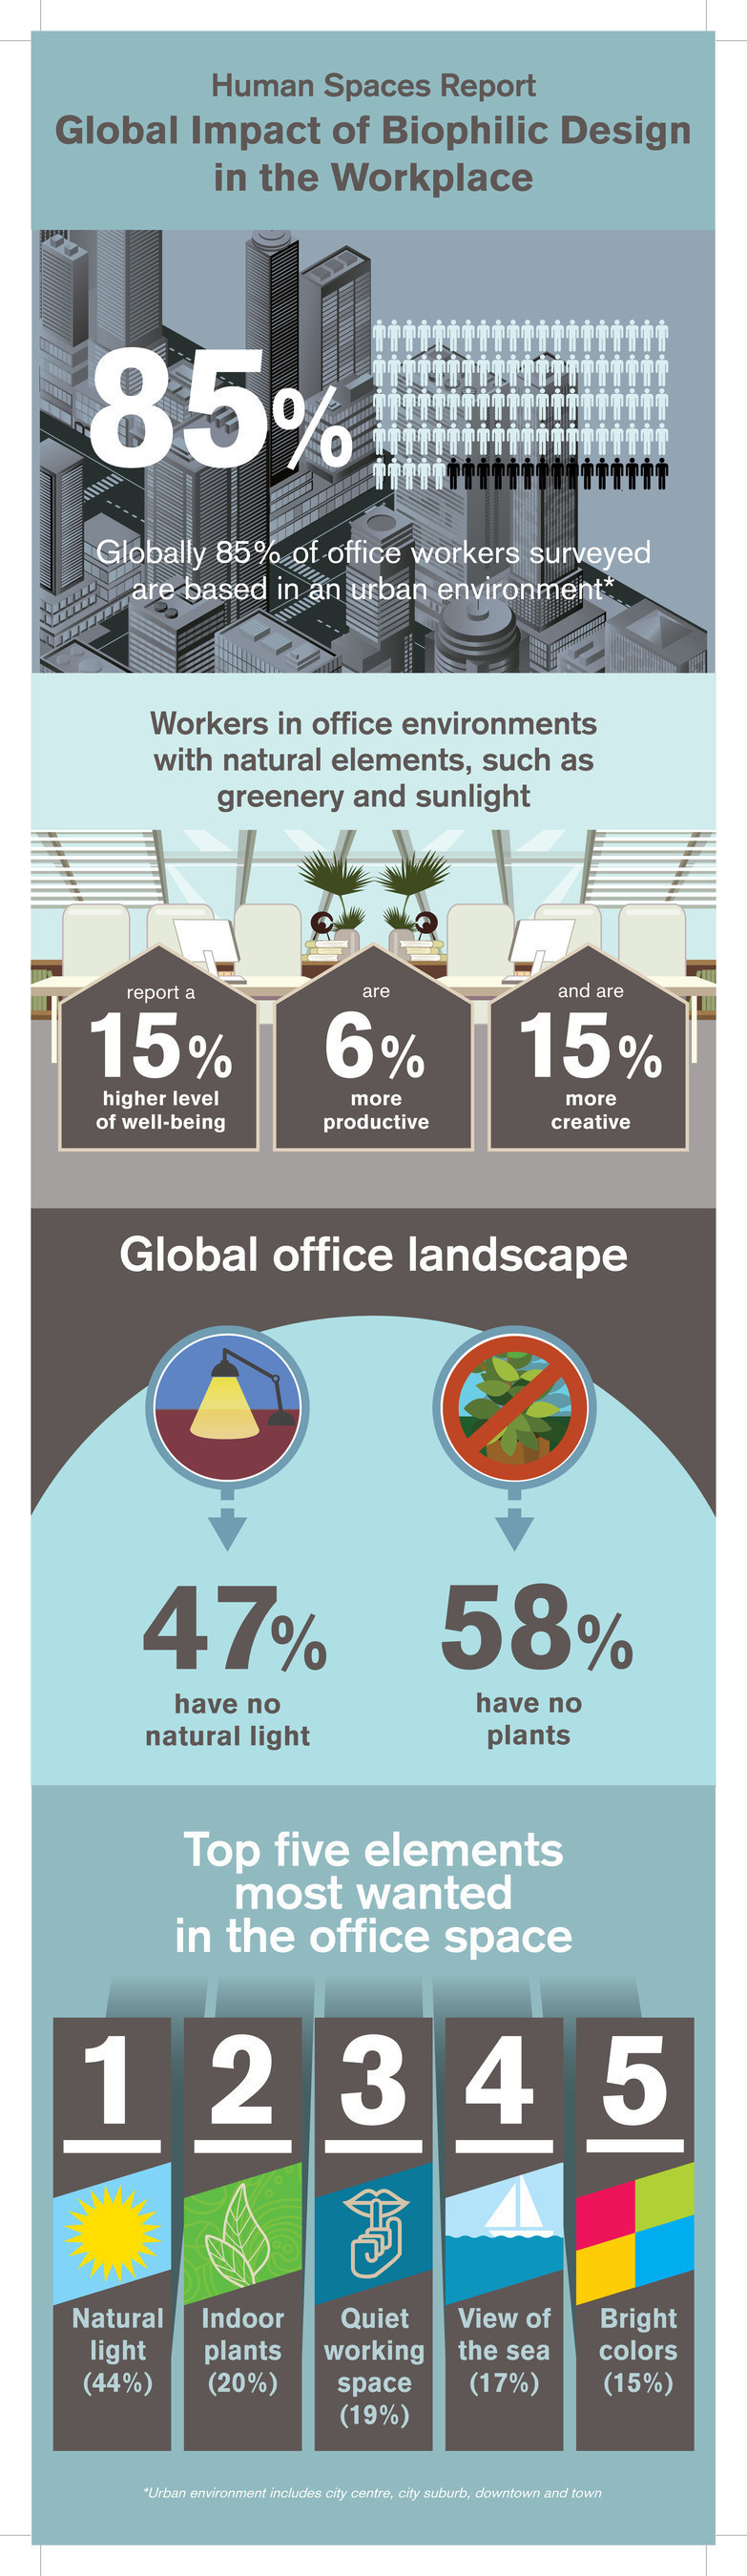 Human Spaces infographic